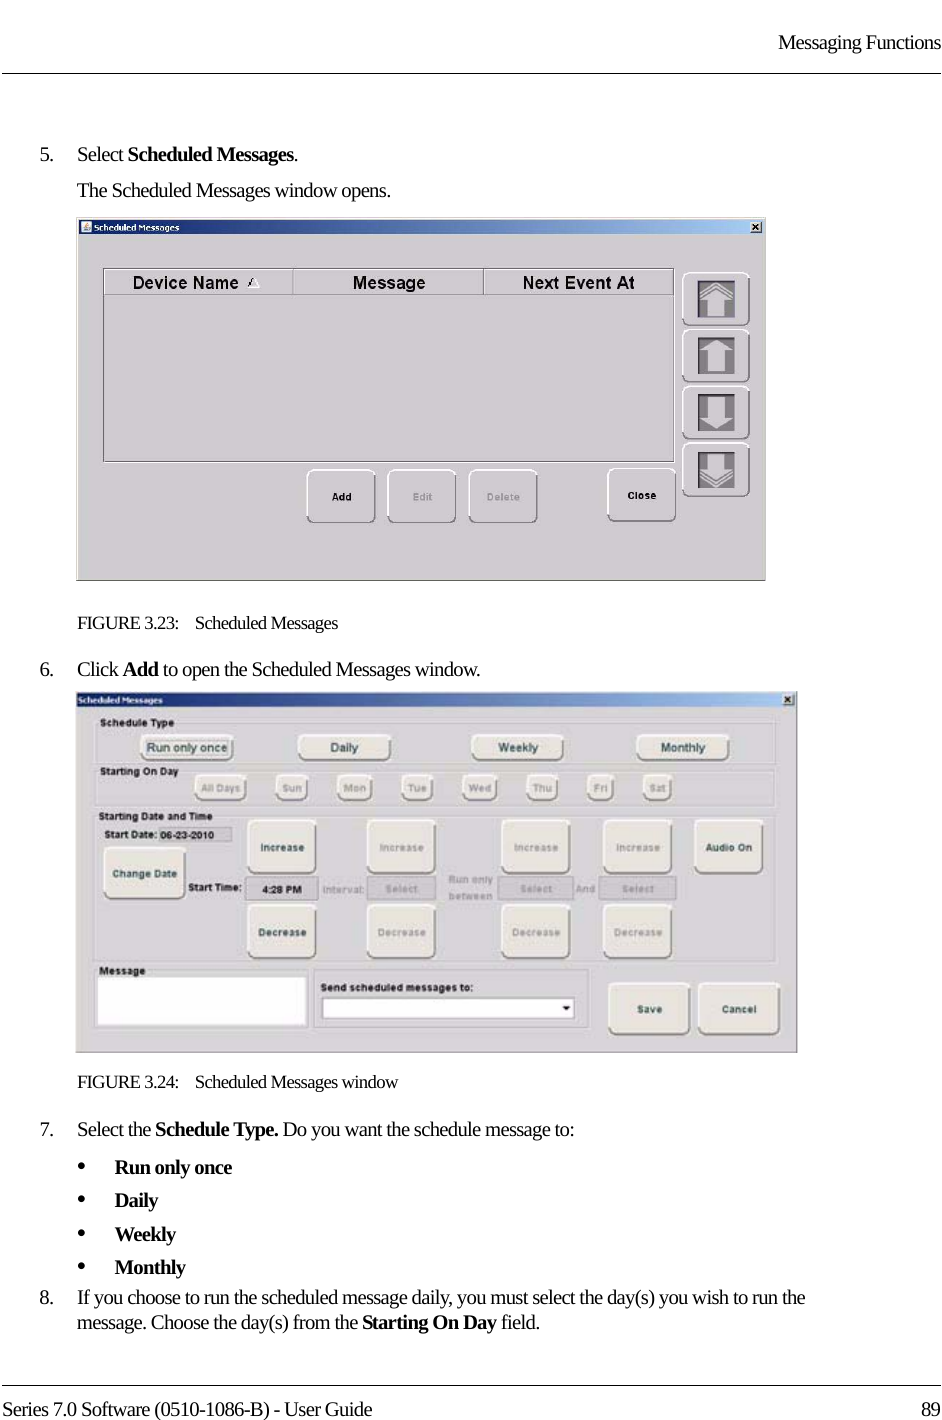 Series 7.0 Software (0510-1086-B) - User Guide  89Messaging Functions5.    Select Scheduled Messages.The Scheduled Messages window opens.FIGURE 3.23:    Scheduled Messages6.    Click Add to open the Scheduled Messages window.FIGURE 3.24:    Scheduled Messages window7.    Select the Schedule Type. Do you want the schedule message to:•Run only once•Daily•Weekly•Monthly8.    If you choose to run the scheduled message daily, you must select the day(s) you wish to run the message. Choose the day(s) from the Starting On Day field.